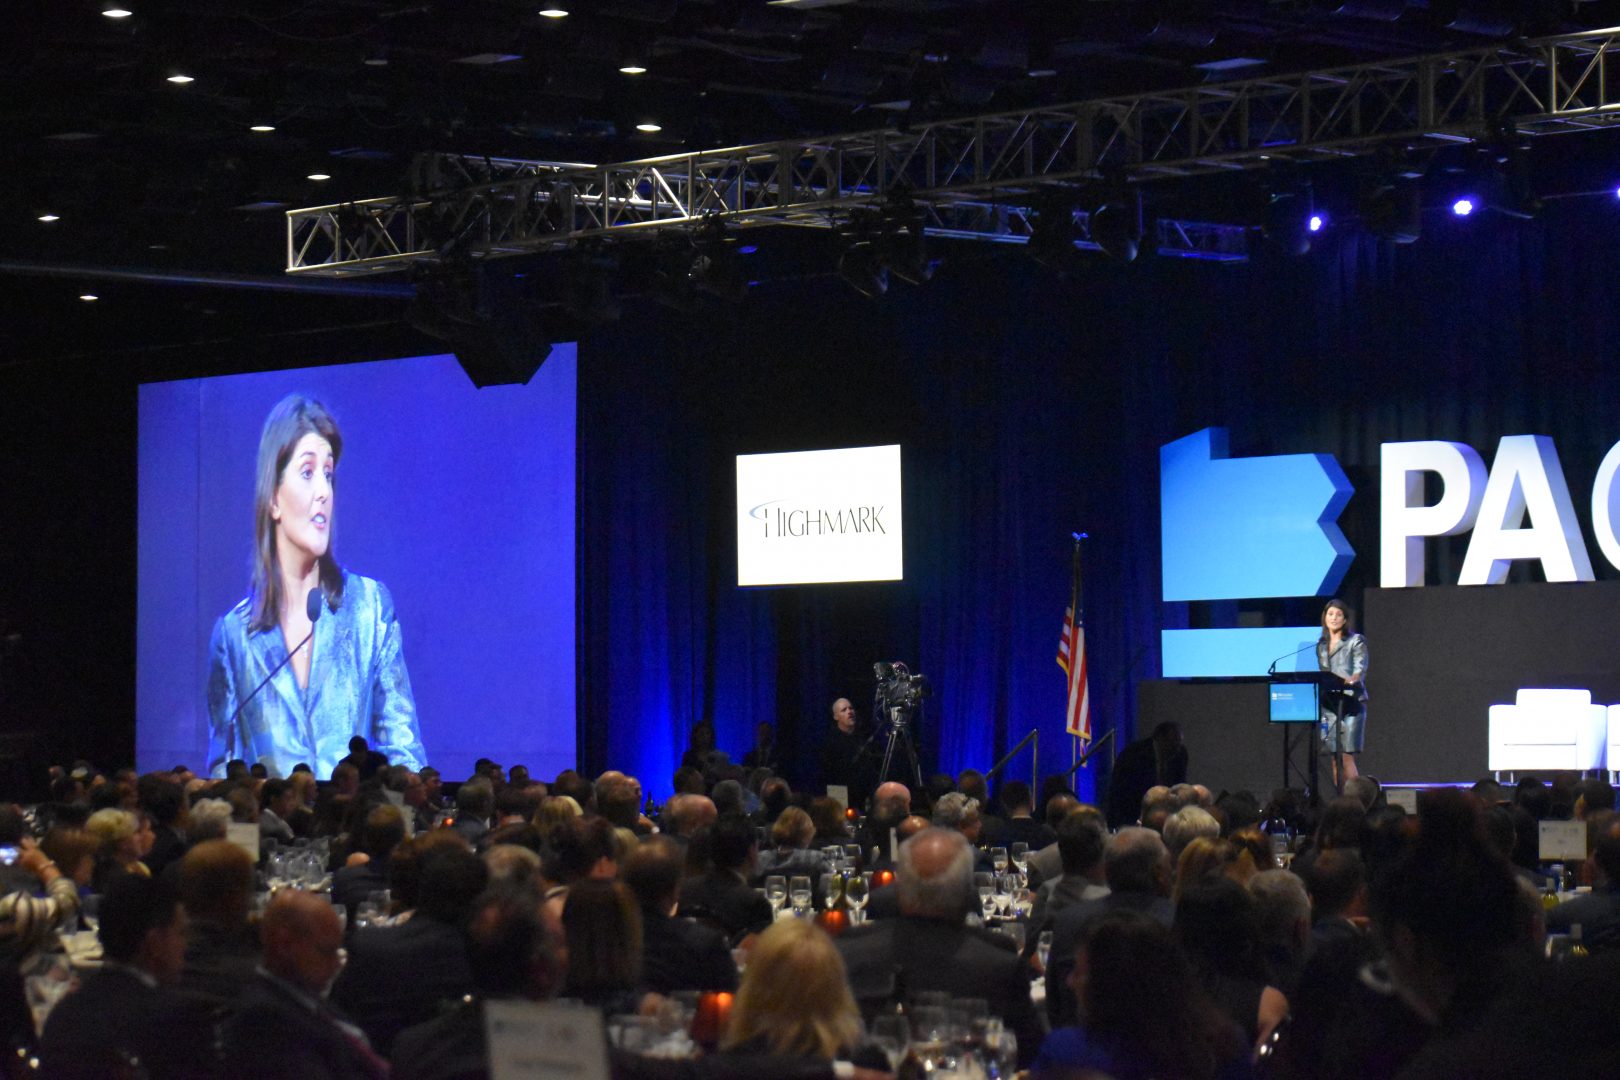 Nikki Haley, the former U.S. ambassador to the United Nations, speaks at the annual dinner of the Pennsylvania Chamber of Business and Industry on Sept. 23, 2019.